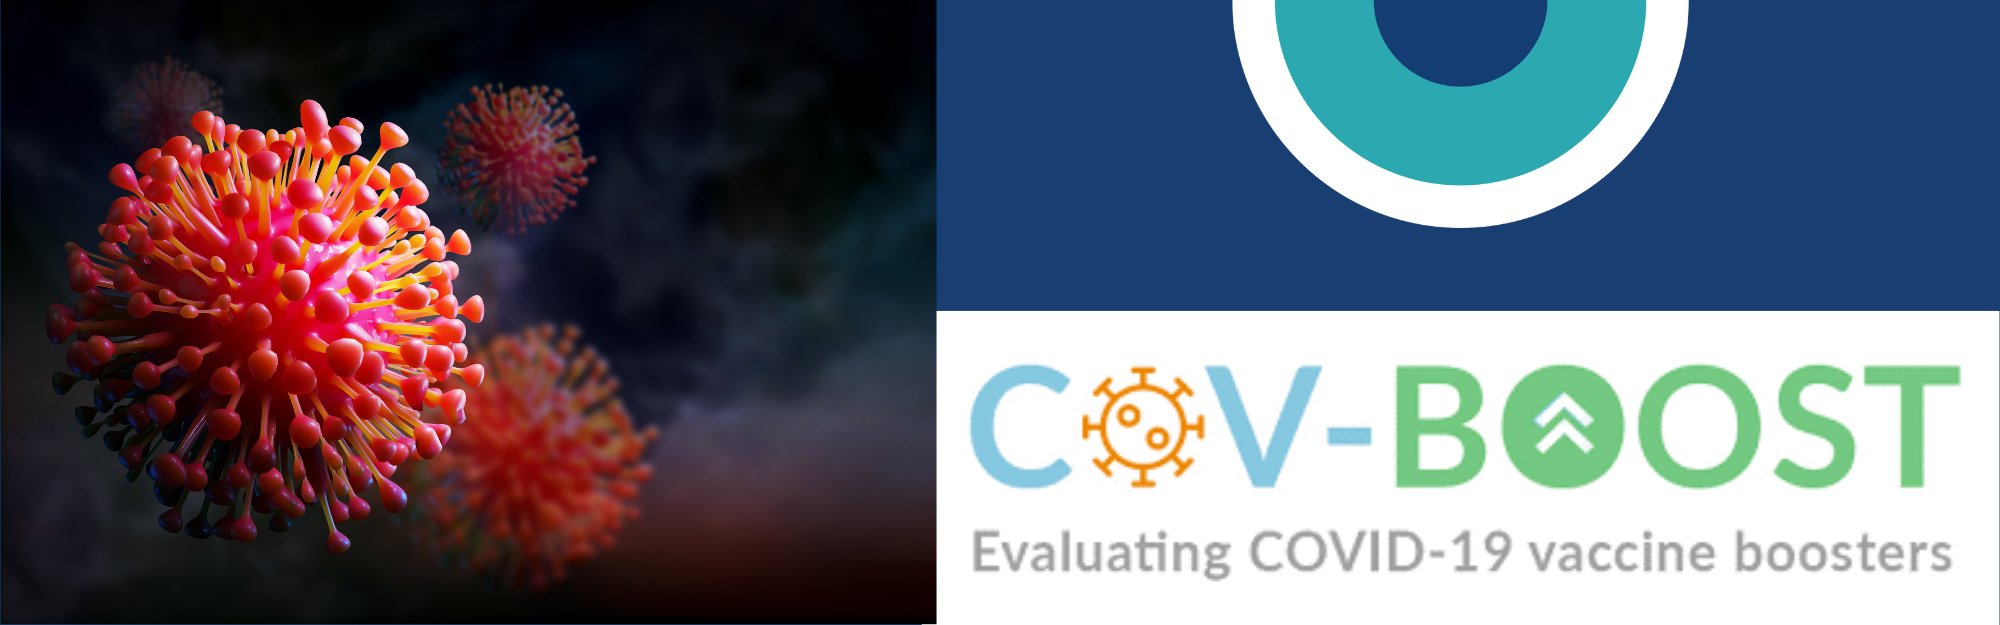 COV-BOOST research study logo with virus depiction